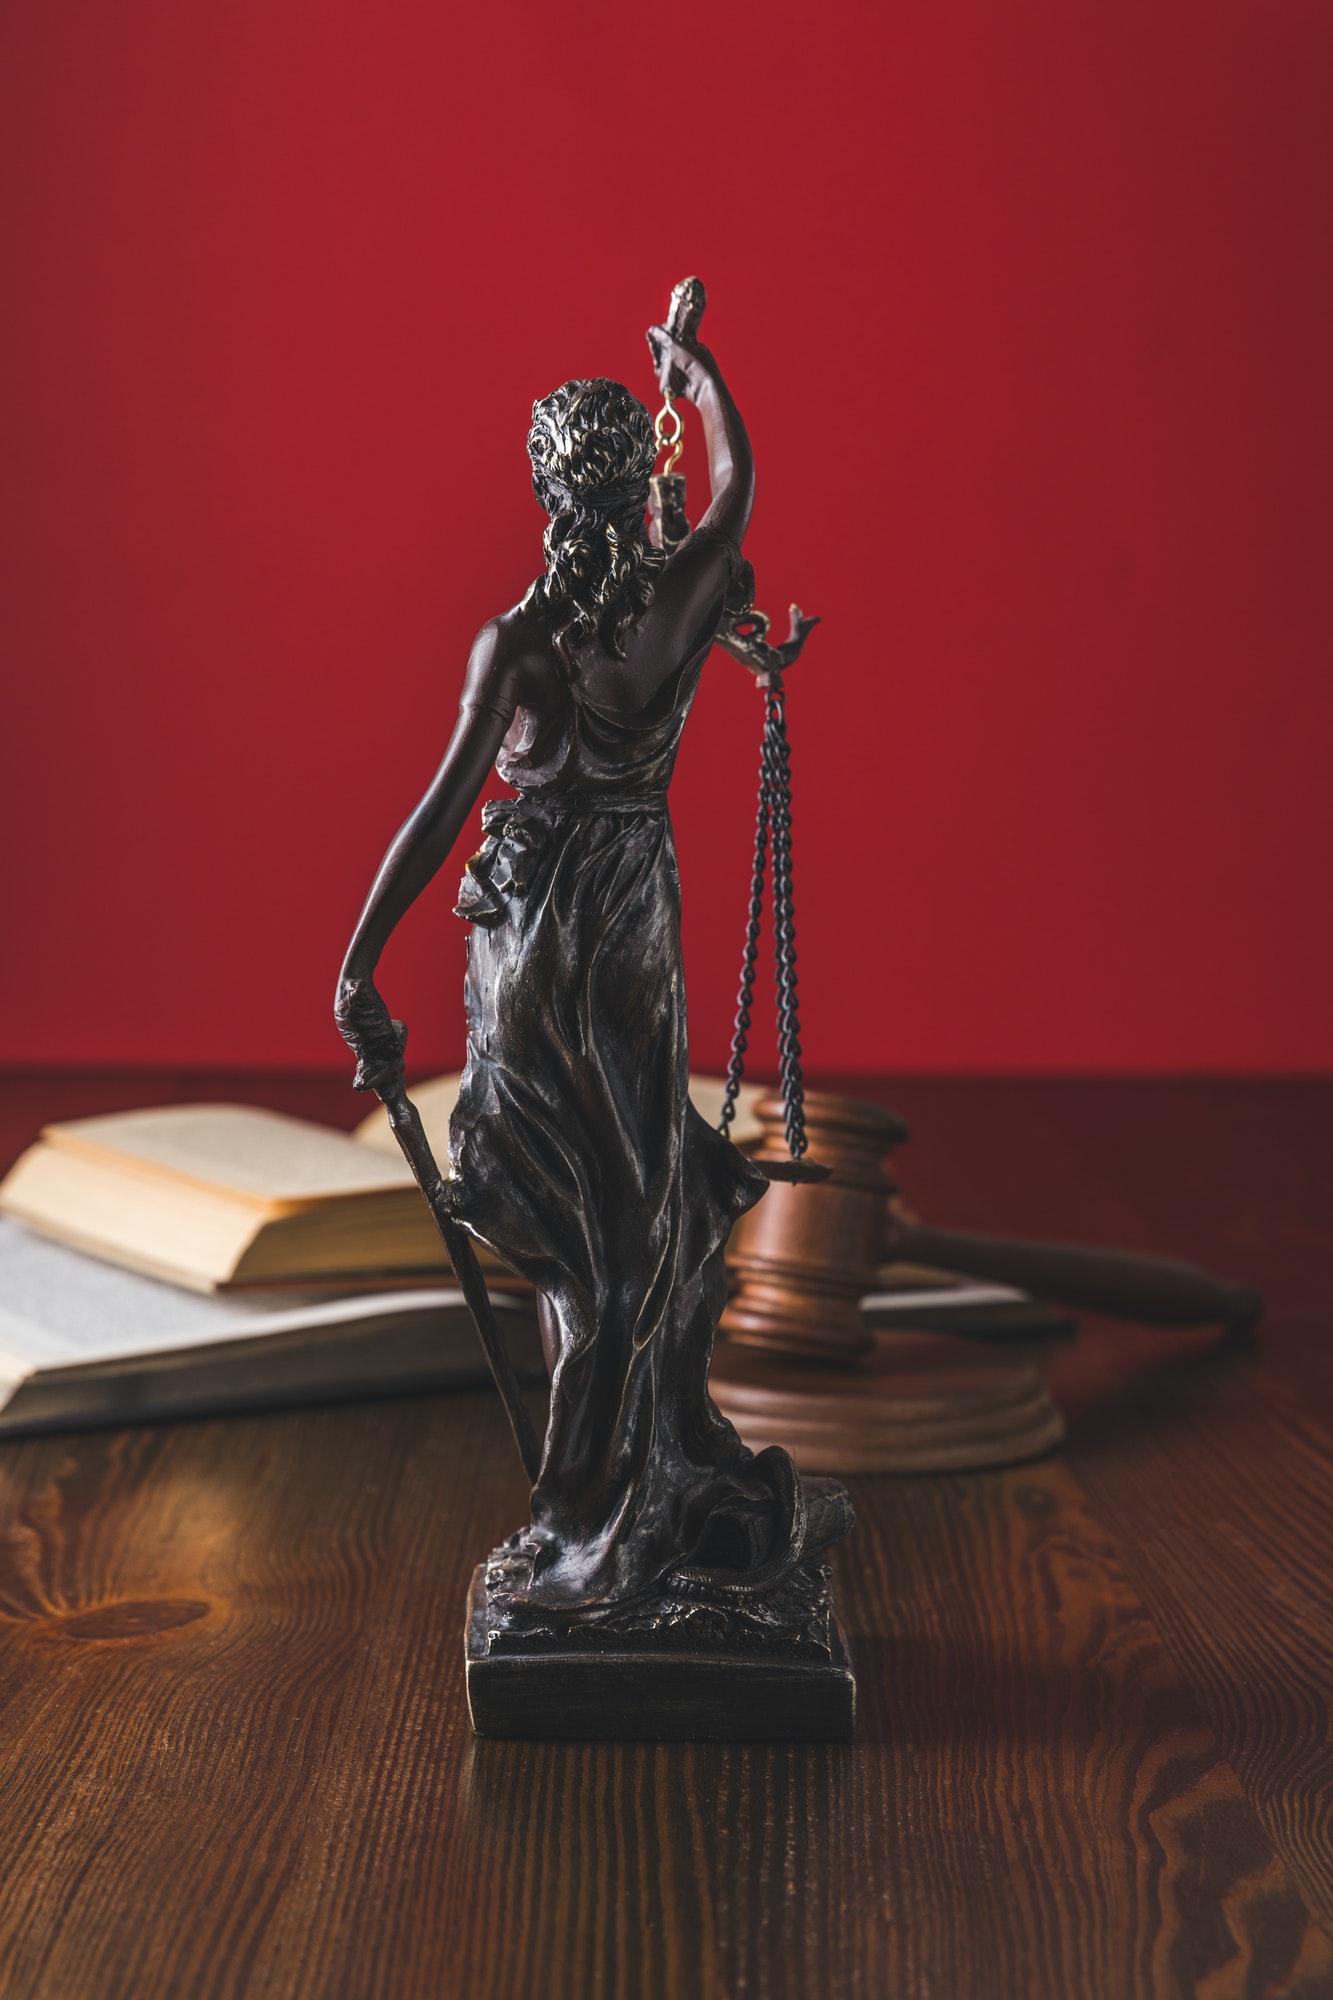 opened-juridical-books-with-lady-justice-statue-on-wooden-table-law-concept.jpg